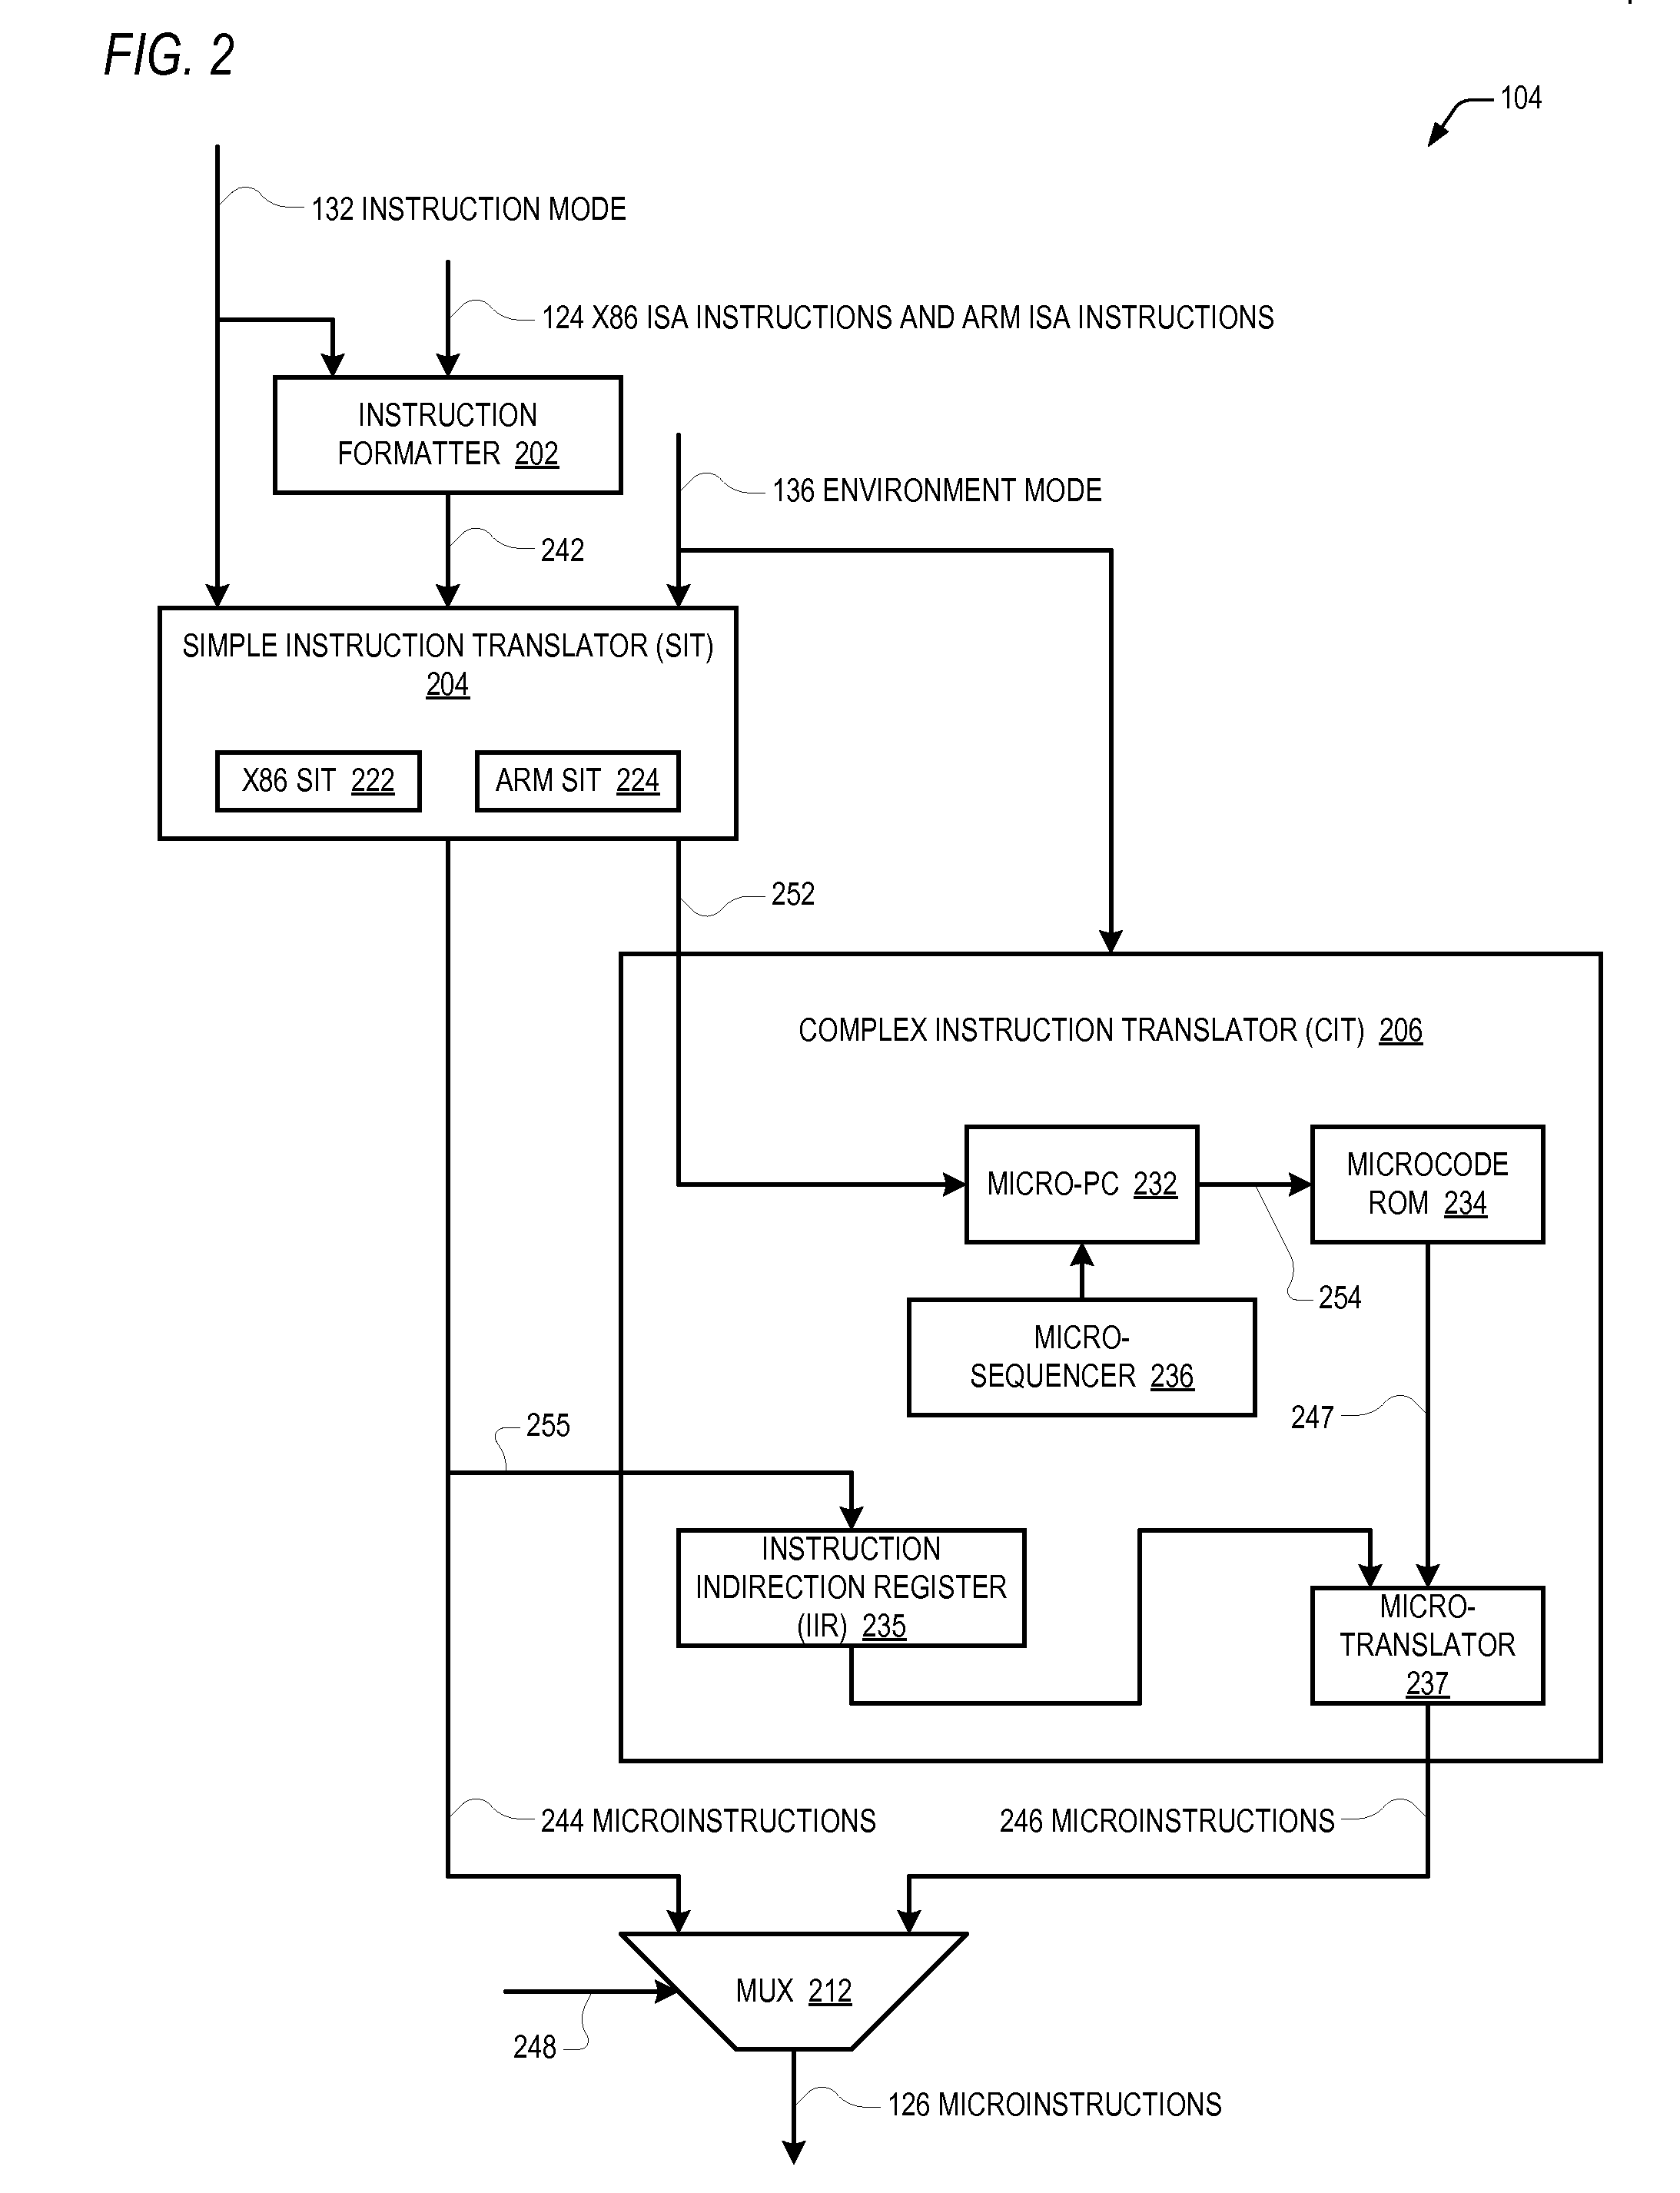 Control register mapping in heterogeneous instruction set architecture processor